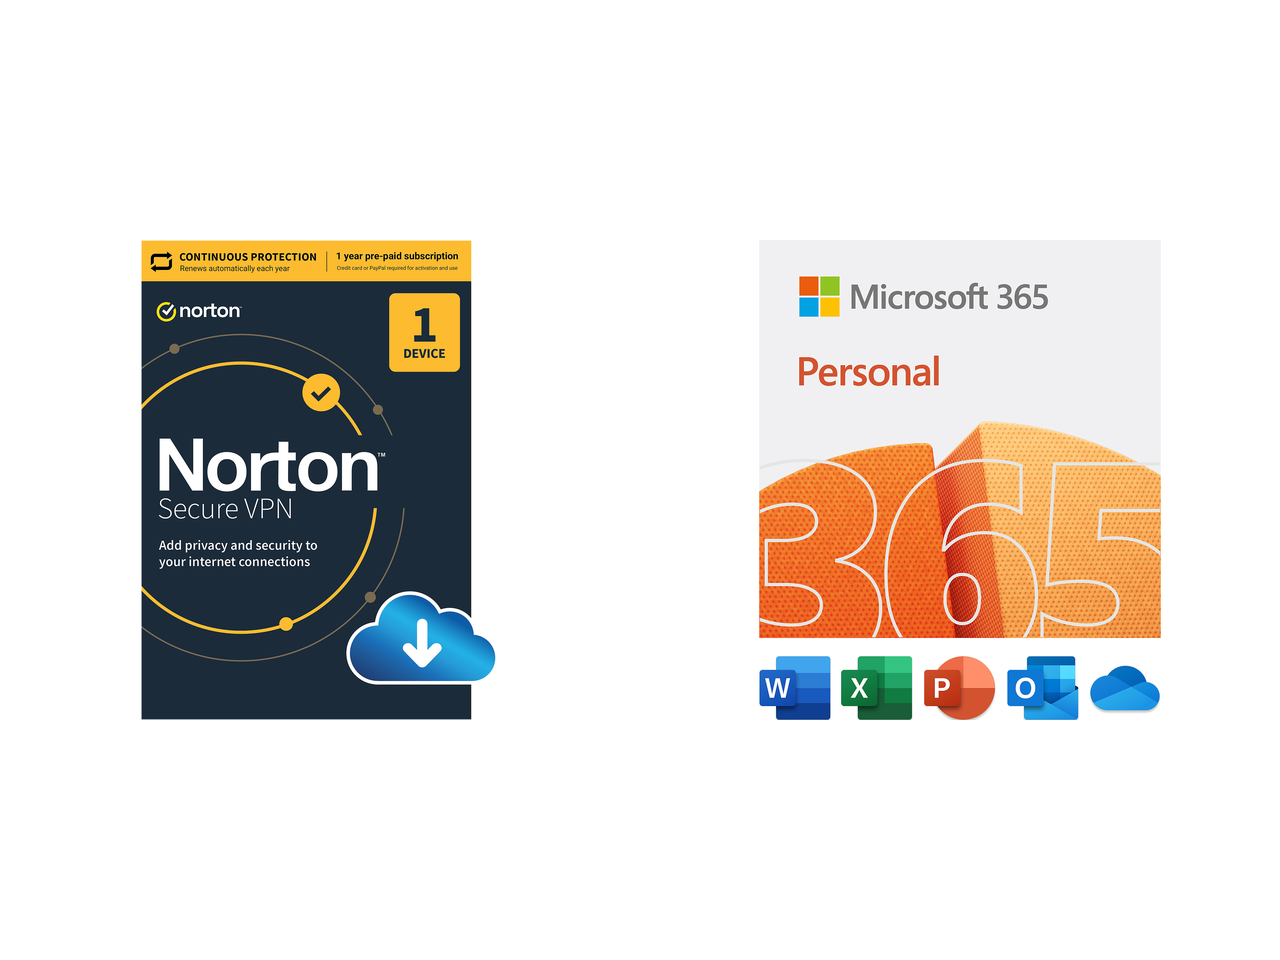 Microsoft 365 Office deals starting at $39.99